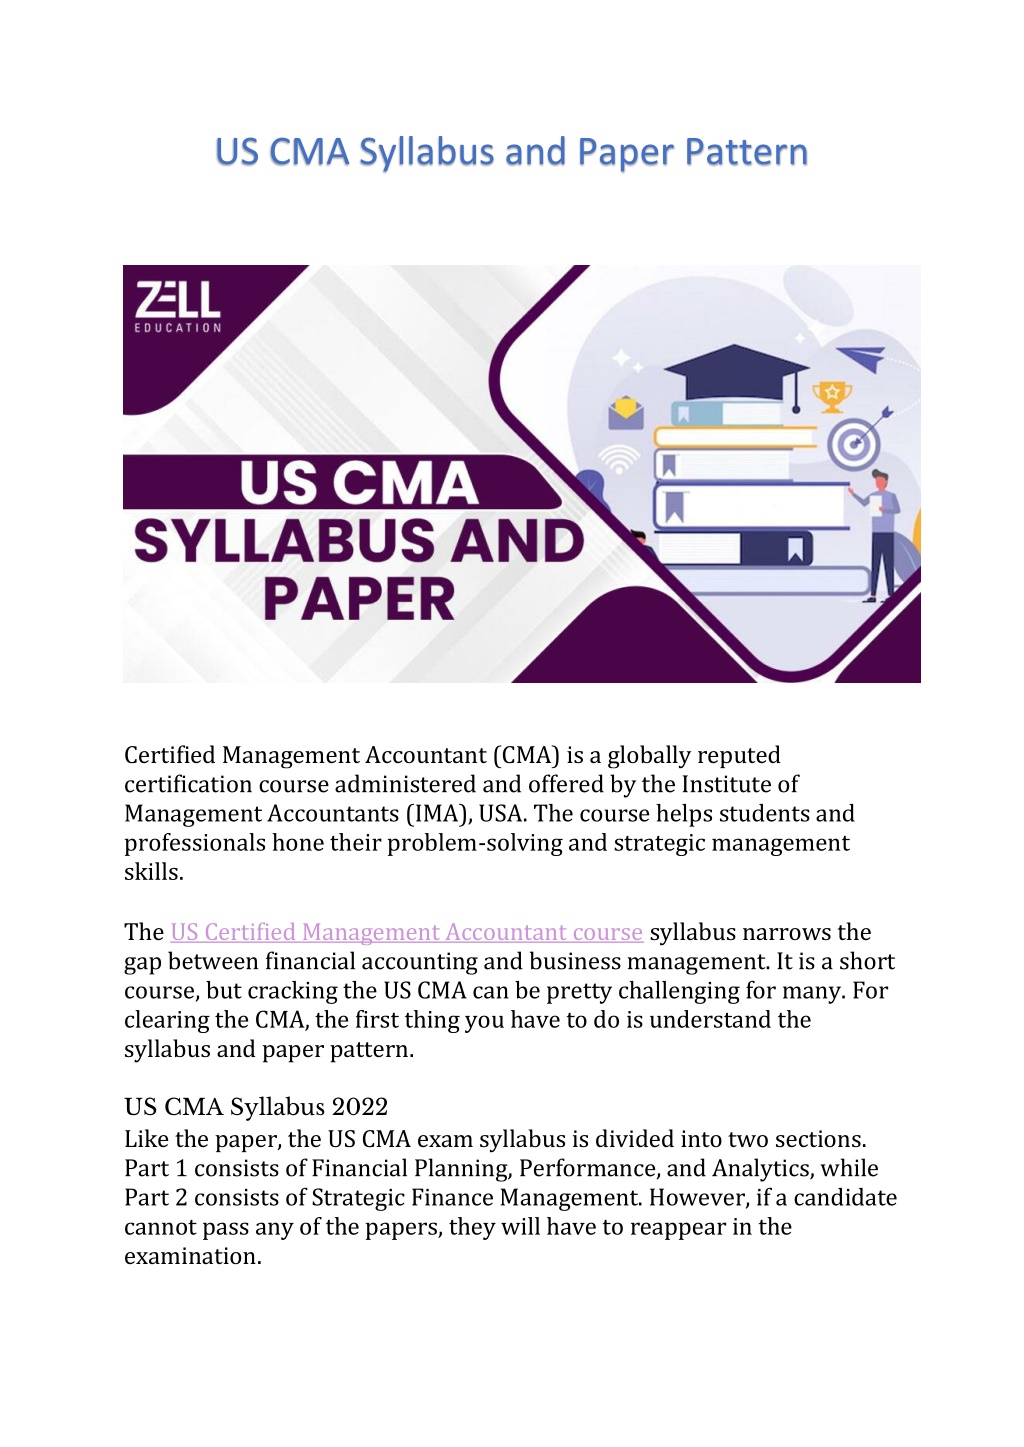 PPT US CMA Syllabus and Paper Pattern PowerPoint Presentation, free